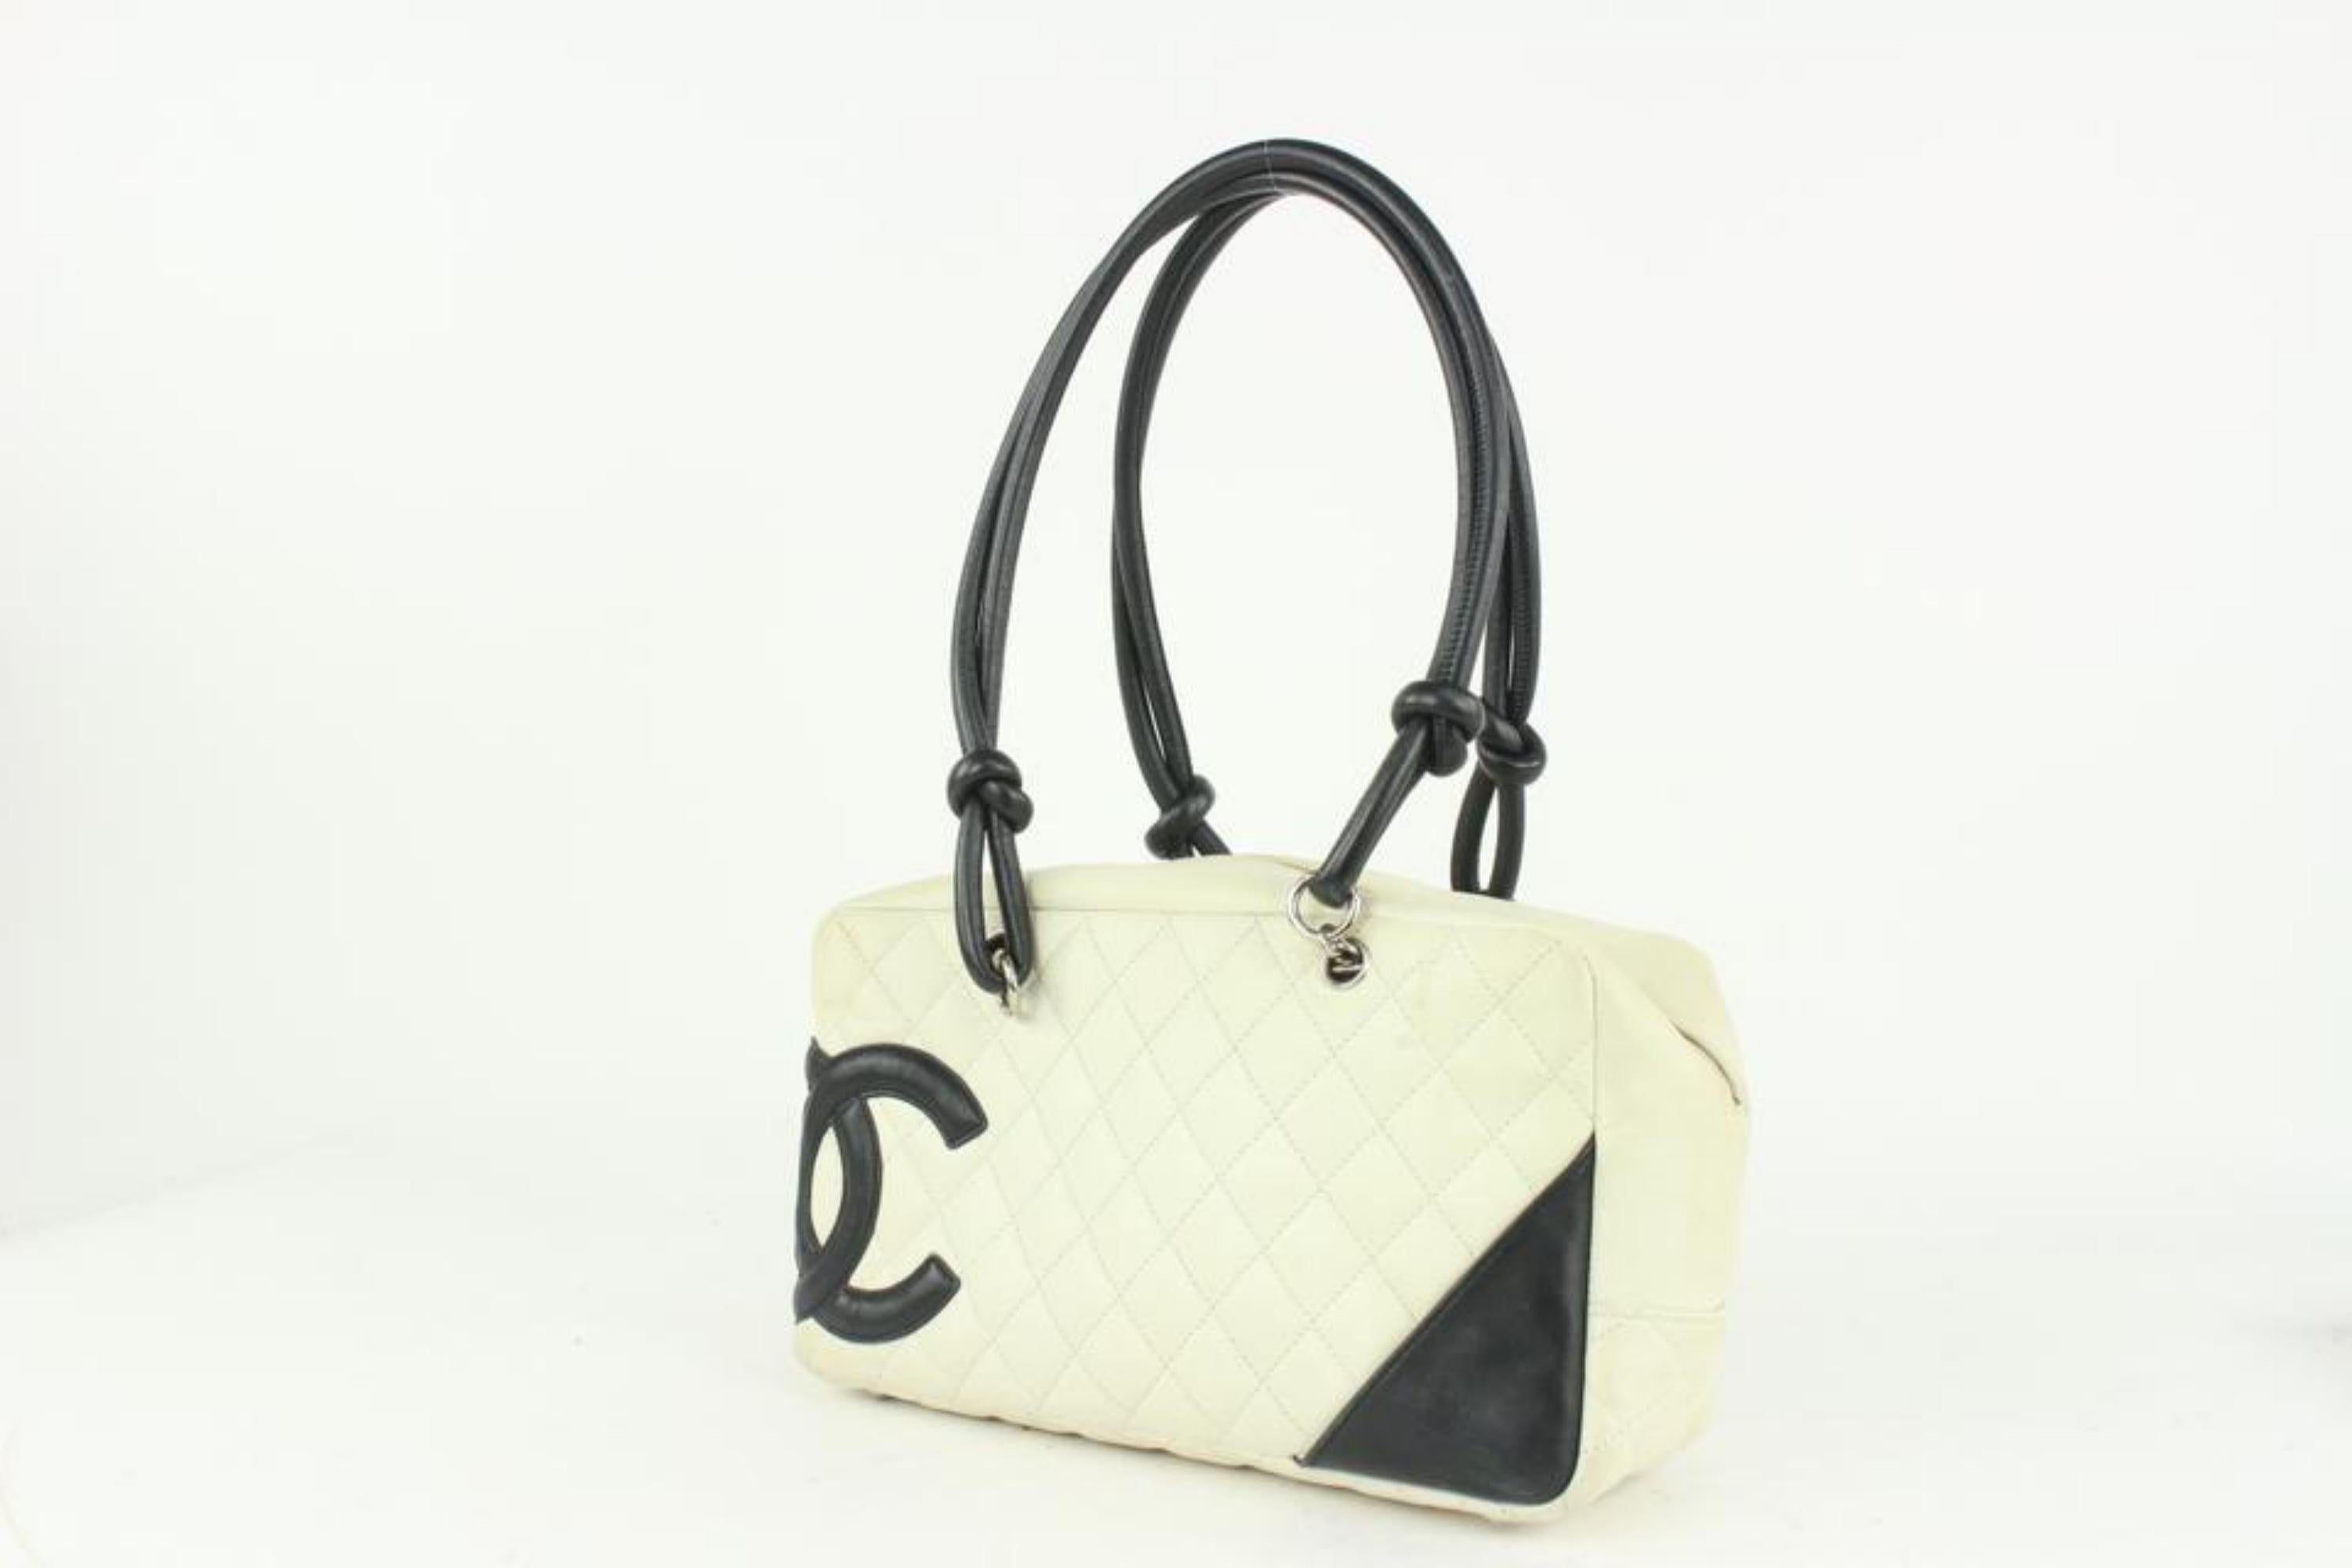 Chanel White Quilted Leather Cambon Boston Camera Bag 7cc1015 6